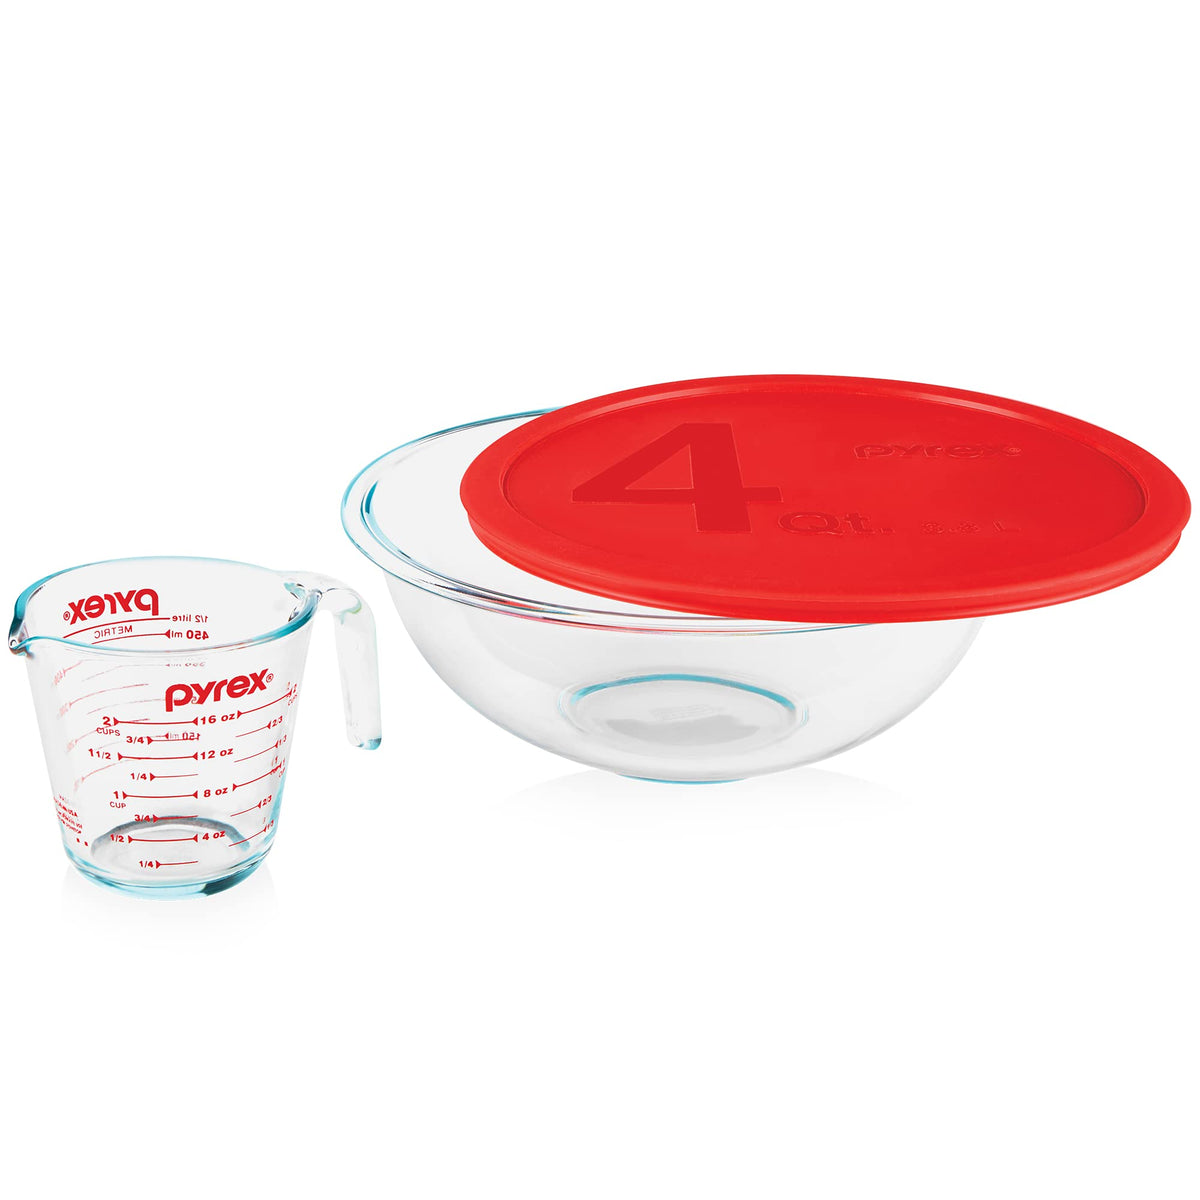 Pyrex Prepware 1-Cup and 2-Cup Glass Measuring Cup Set, with Supreme Box Safe Package